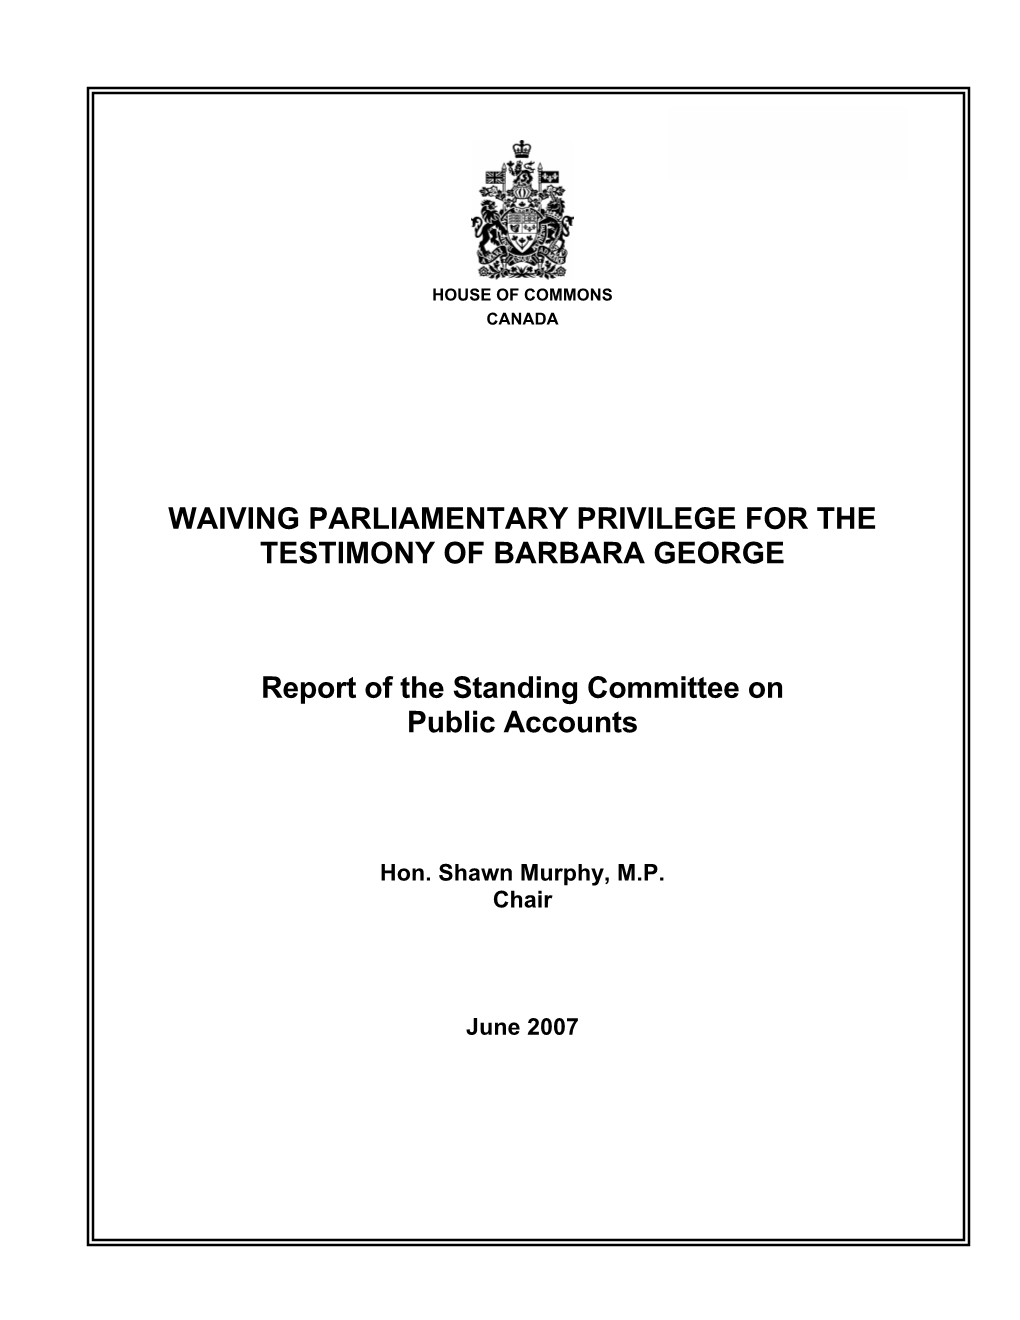 Waiving Parliamentary Privilege for the Testimony of Barbara George